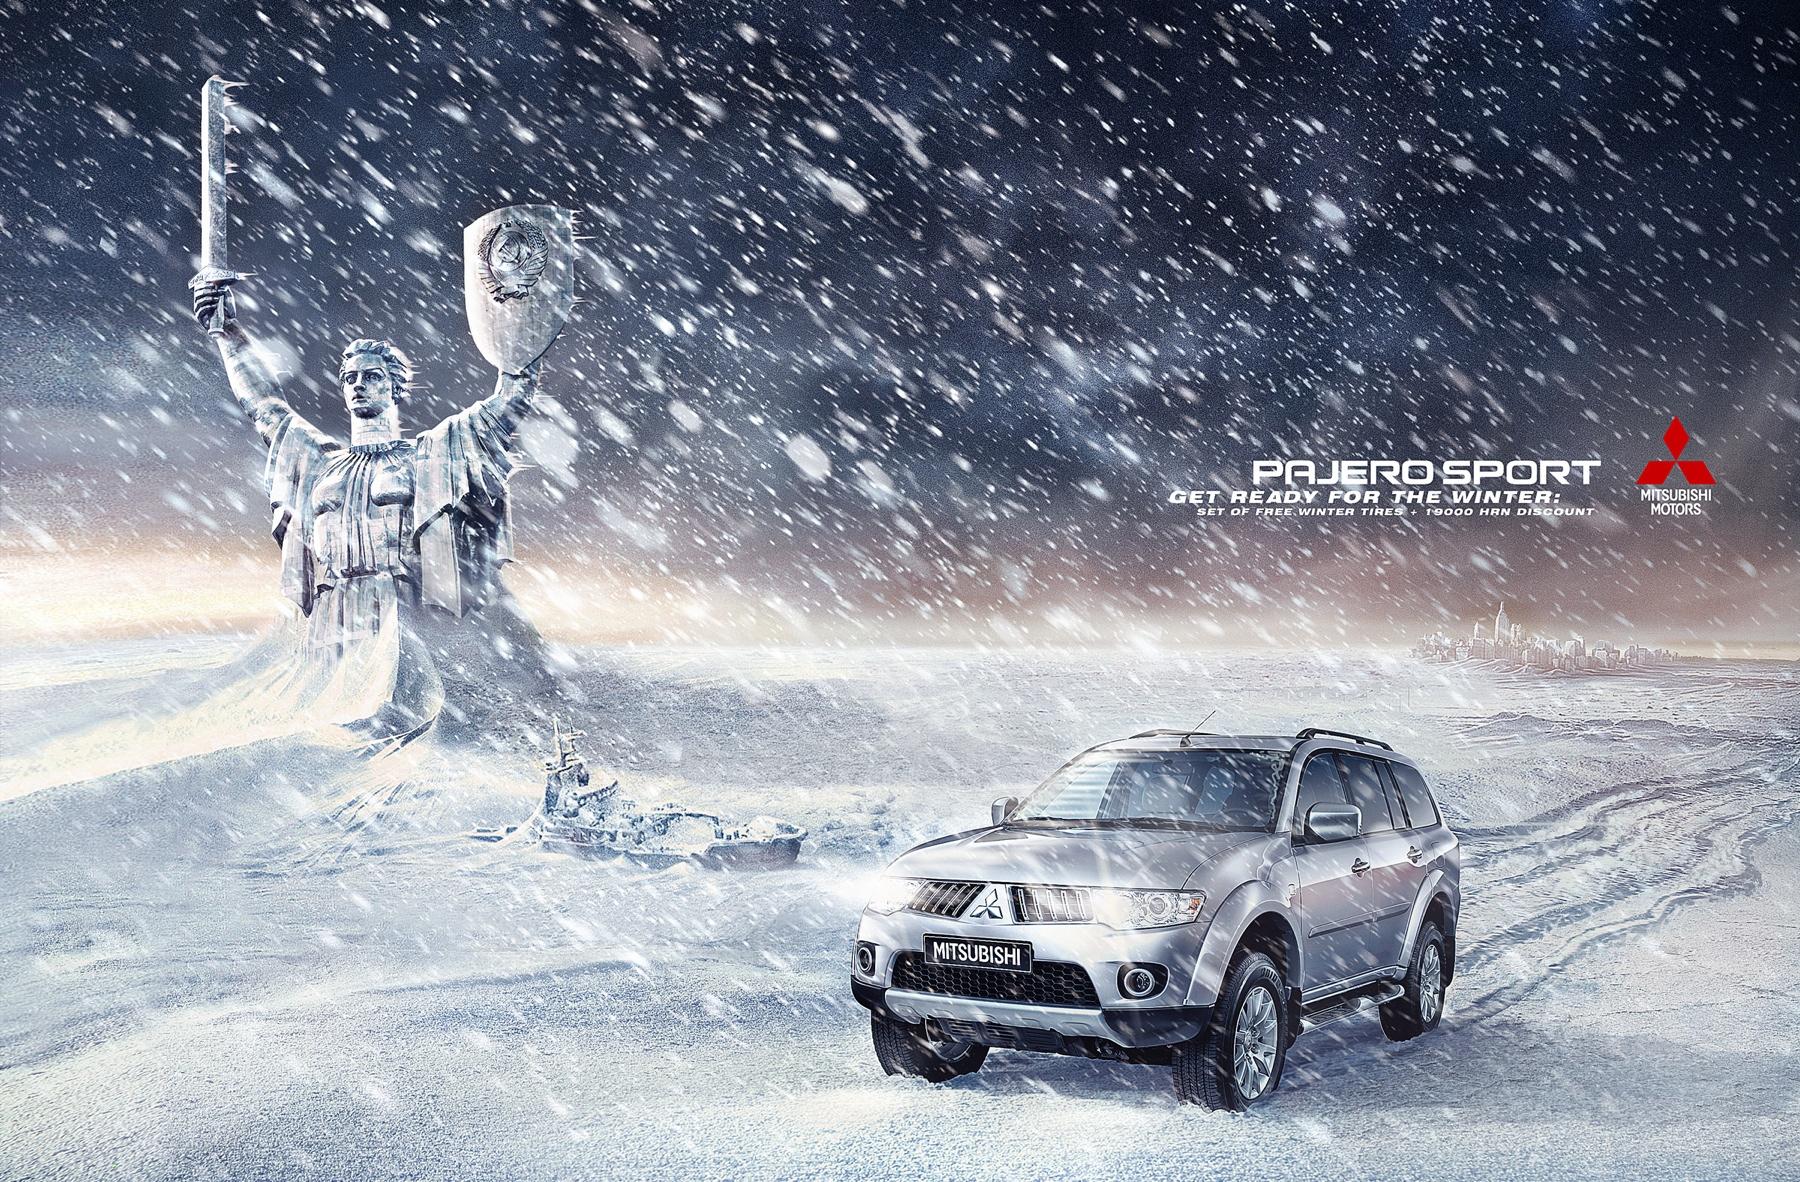 Pajero Print Advert By Kaffeine: The Day After Tomorrow. Ads of the World™